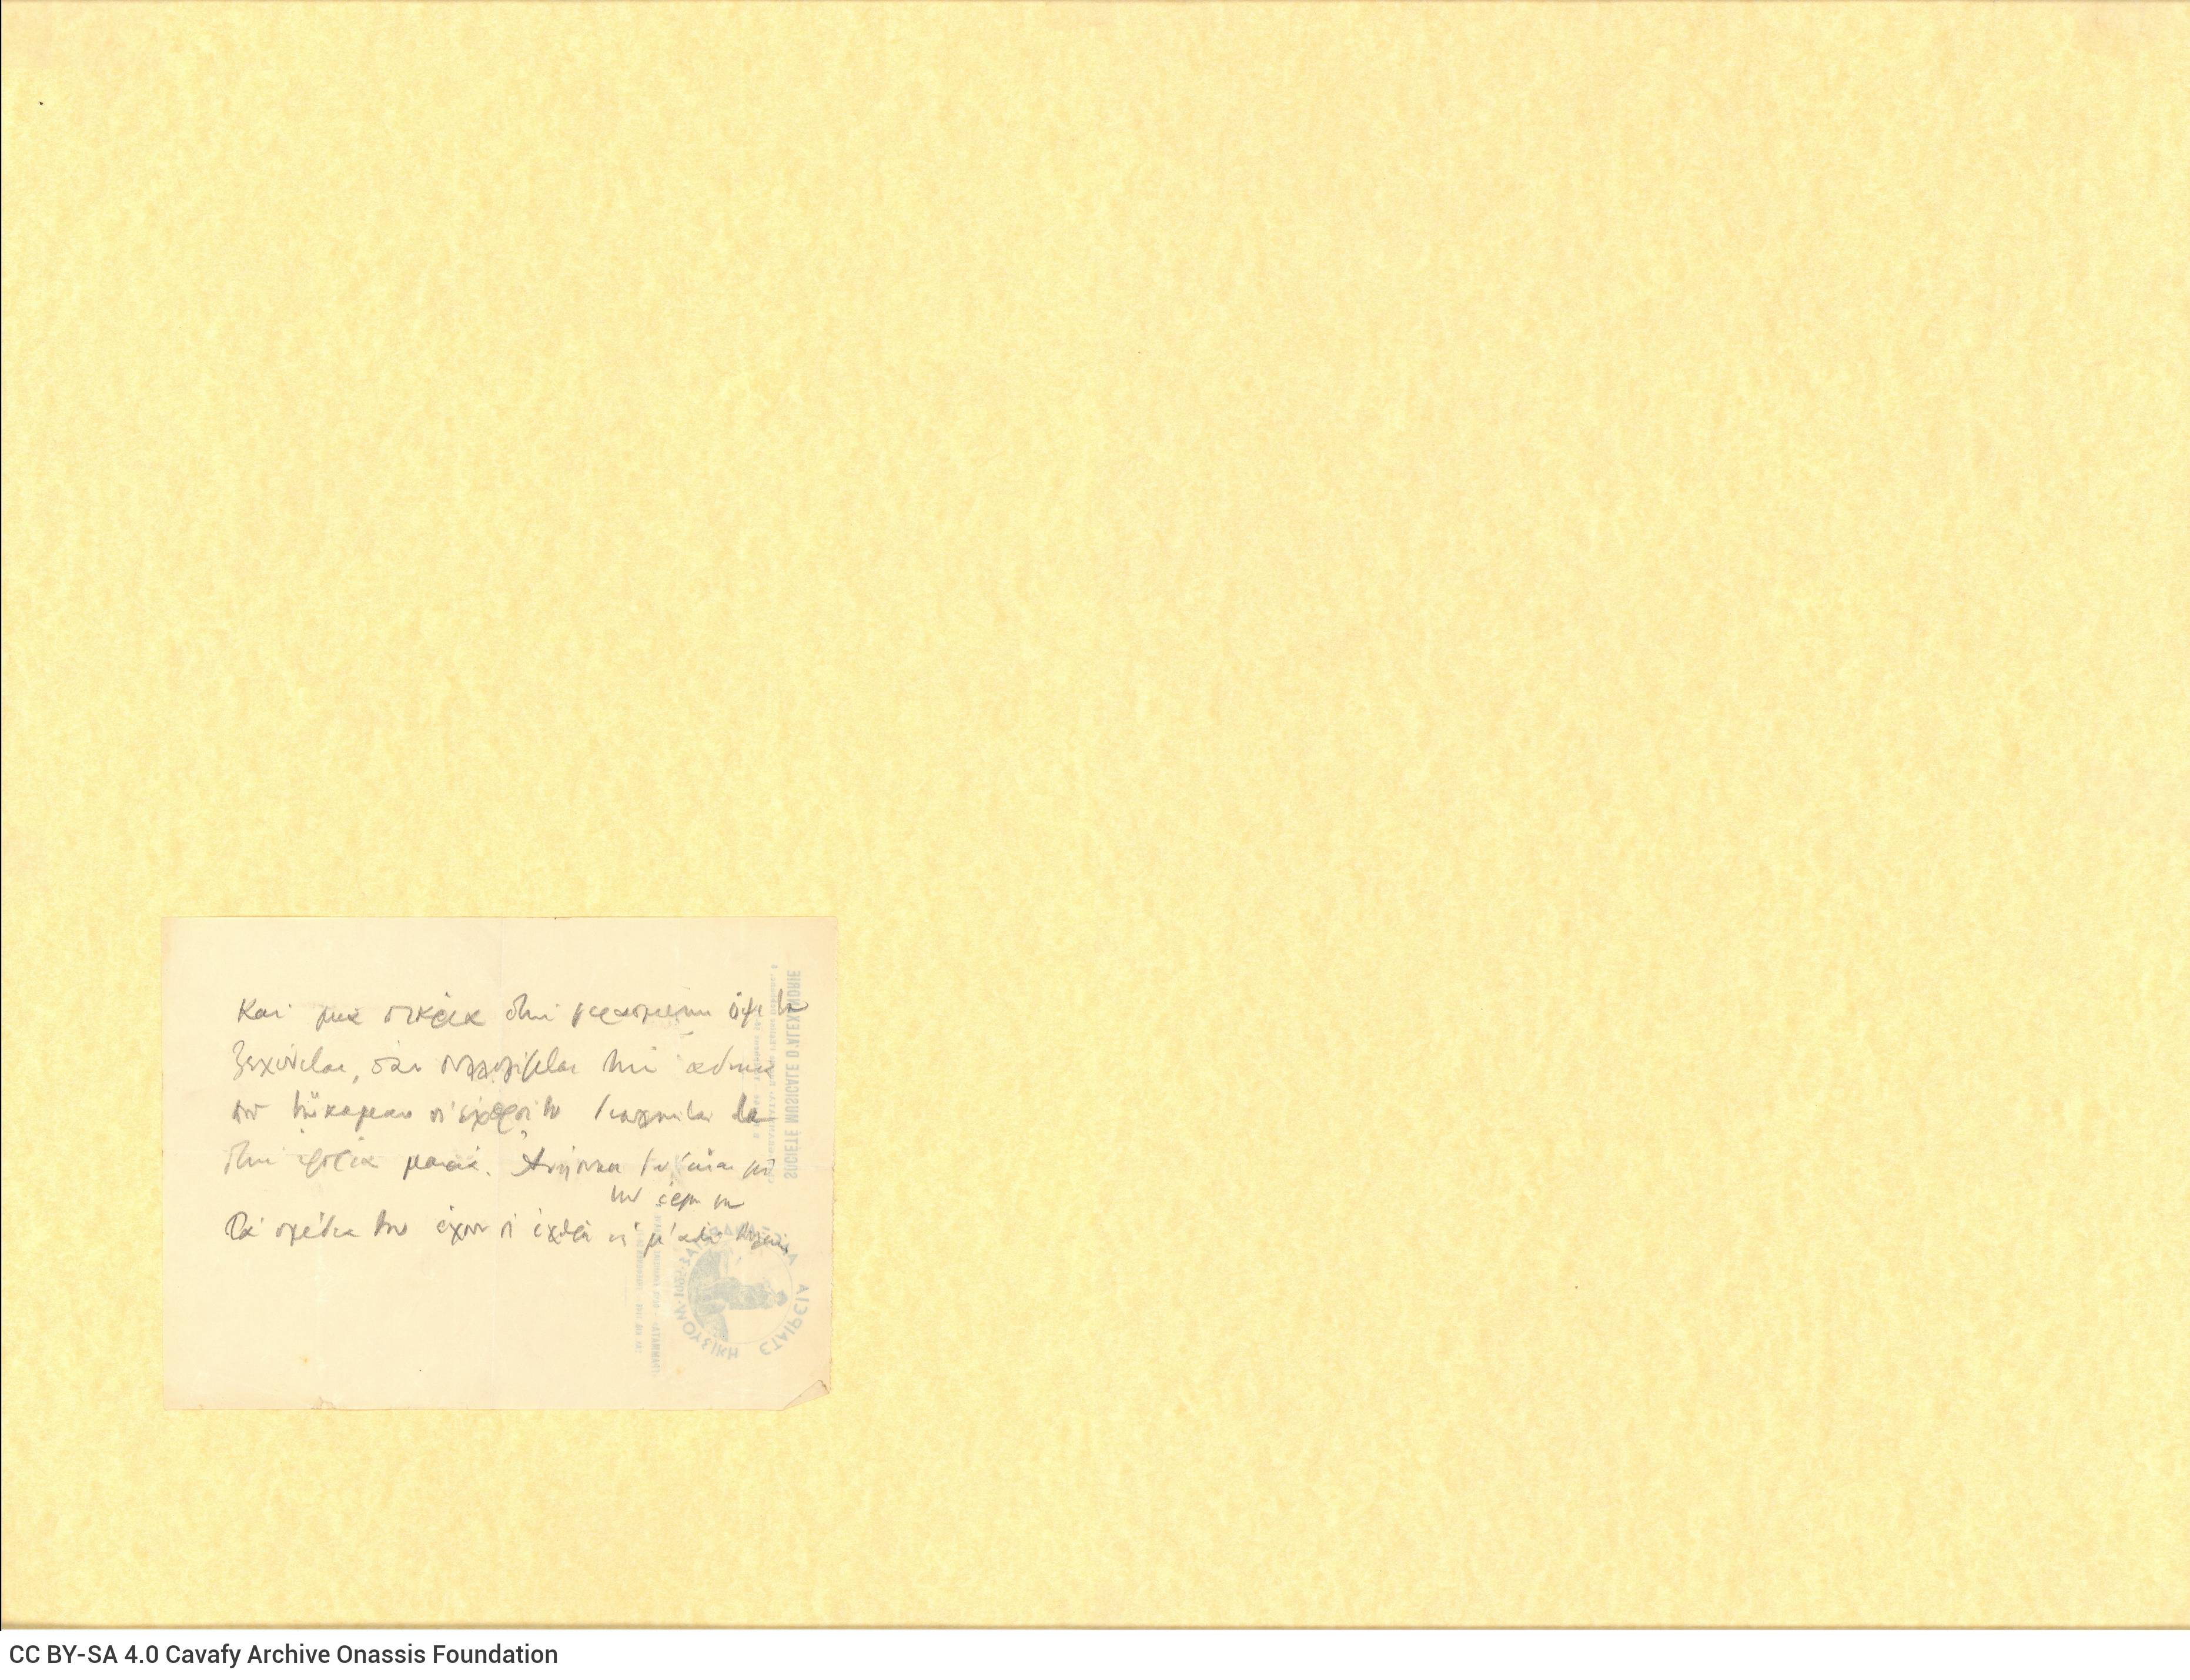 Handwritten notes by Cavafy on one side of a letterhead with the logo and address of the Music Society of Alexandria in Gr